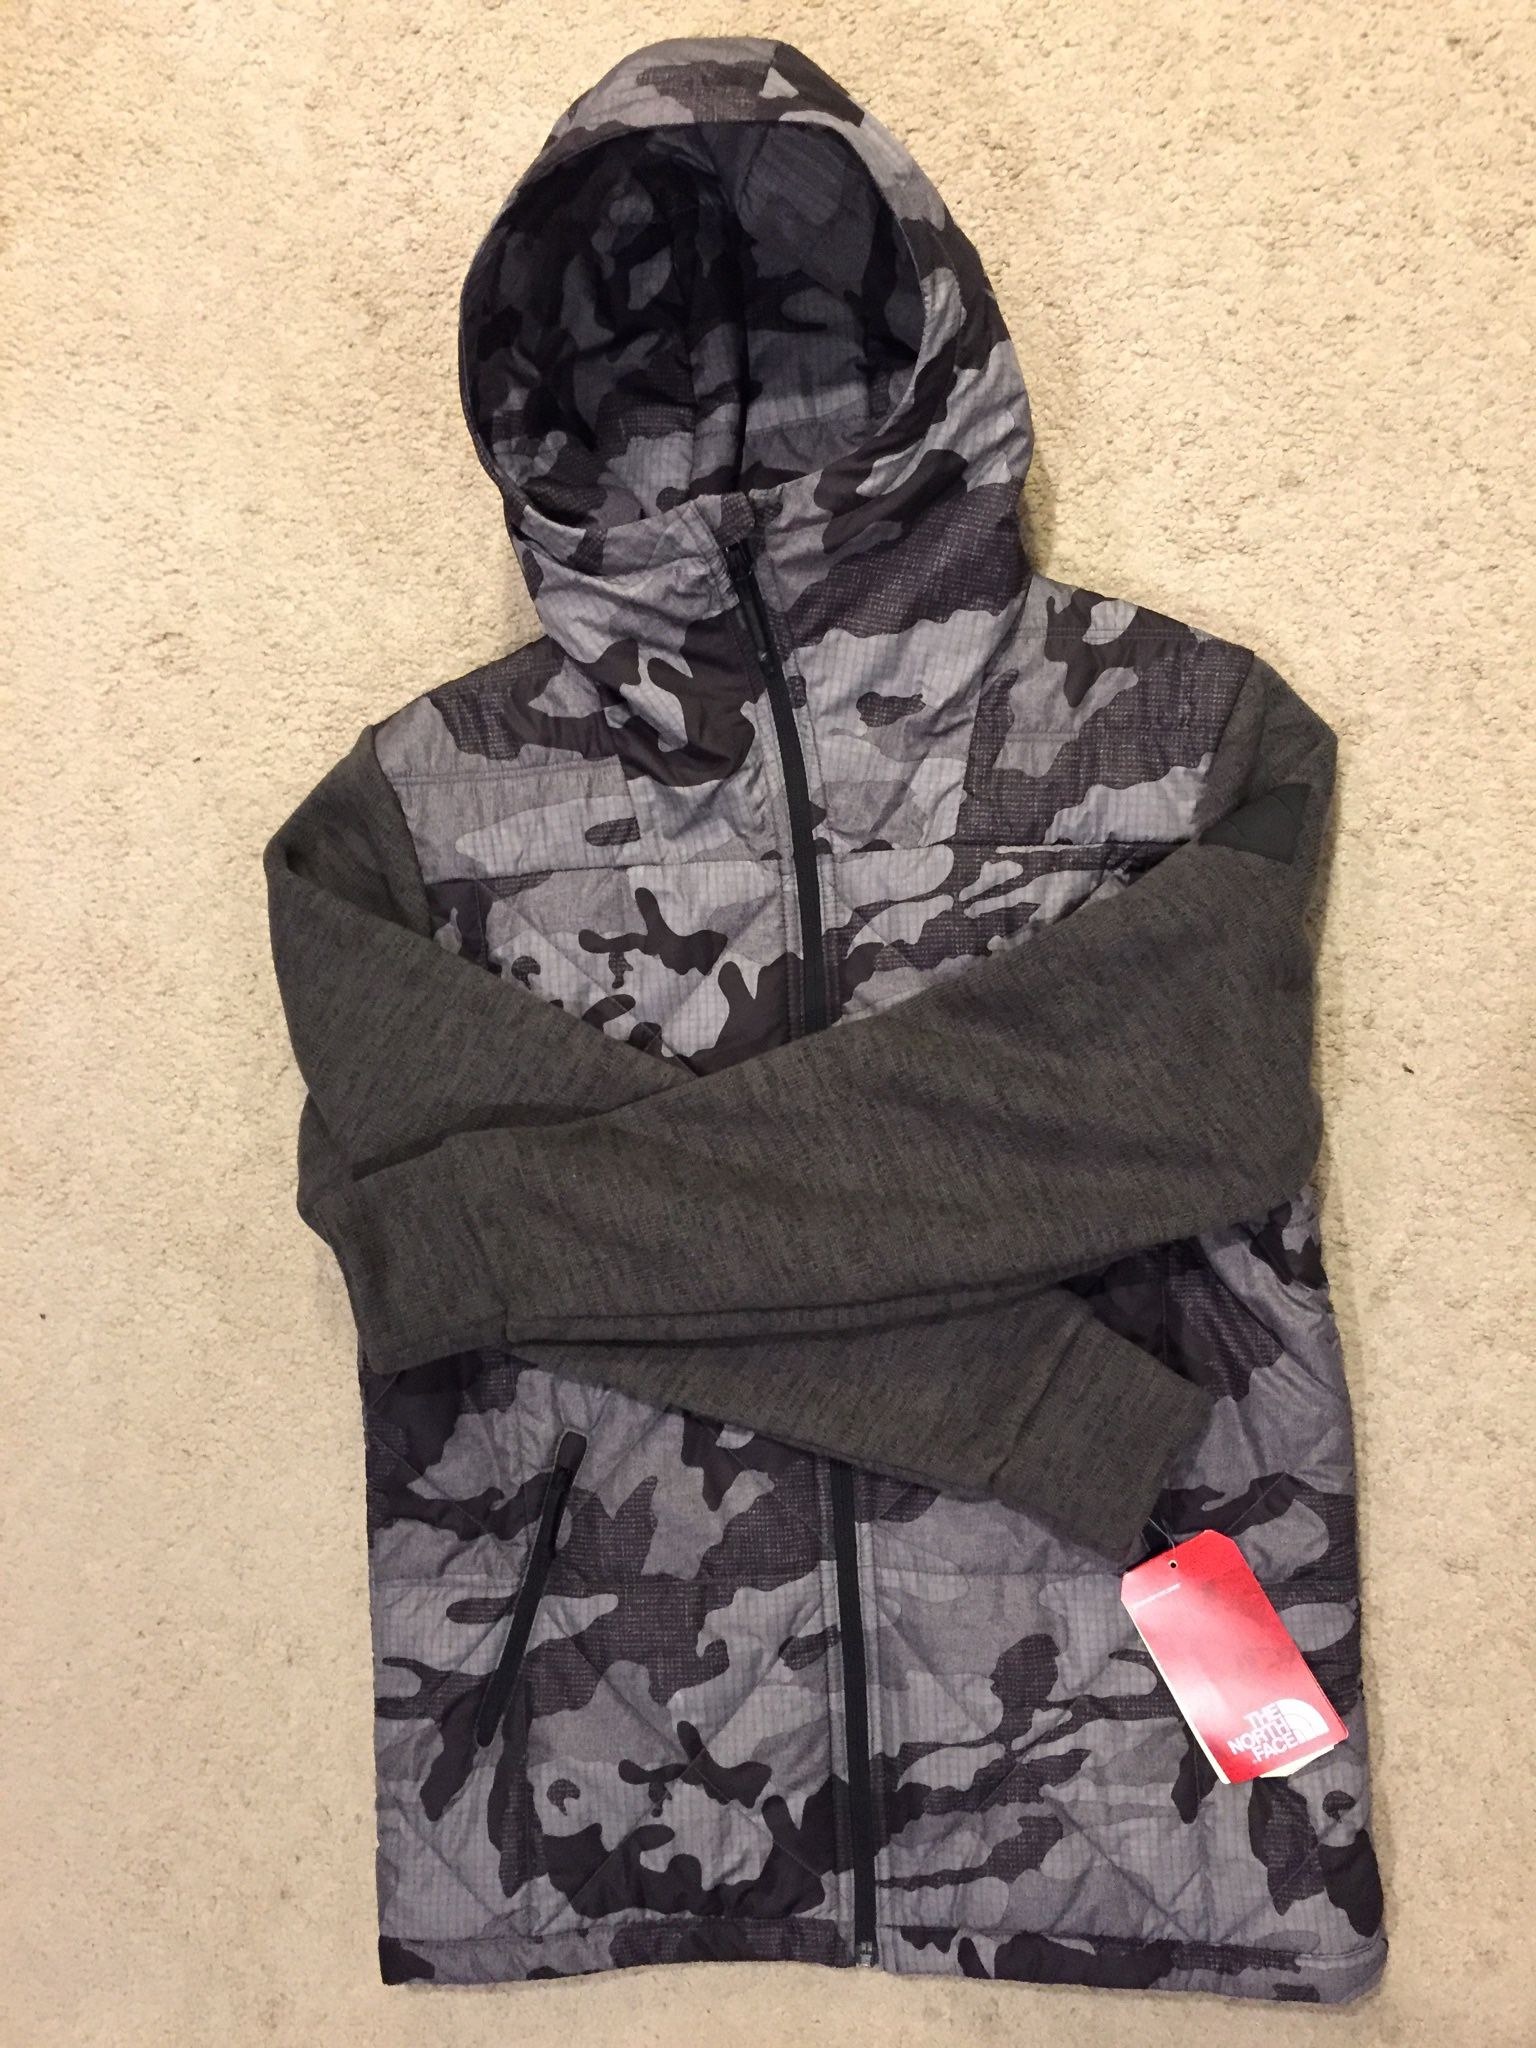 NORTH FACE / “SHADOW CAMO” Insulated Semi-Puffy Coat WATERPROOF Jacket w/ Hood / SIZE: Men’s Small (S) / Brand New w/ Tags!! / Shadow Camo